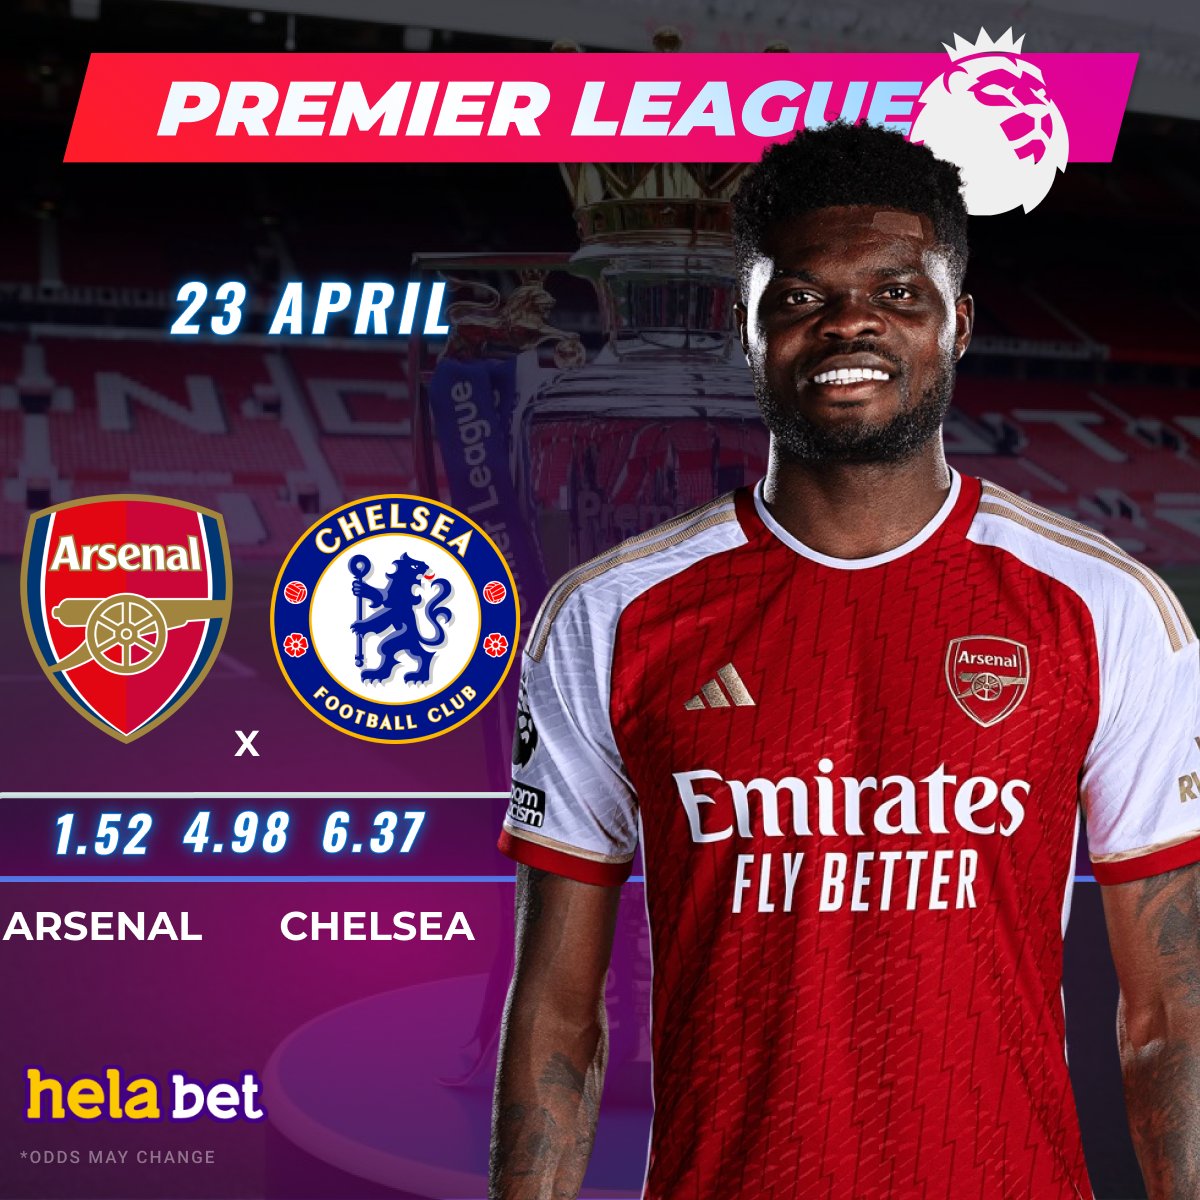 🔥 Today we are waiting for the most interesting match of the 🇬🇧 Premier League 🦁 ⚽ #Arsenal will host #Chelsea 👍 Place a bet on the match in #helabet 👉 cutt.ly/UwY8h1uG #epl #football #premierleague